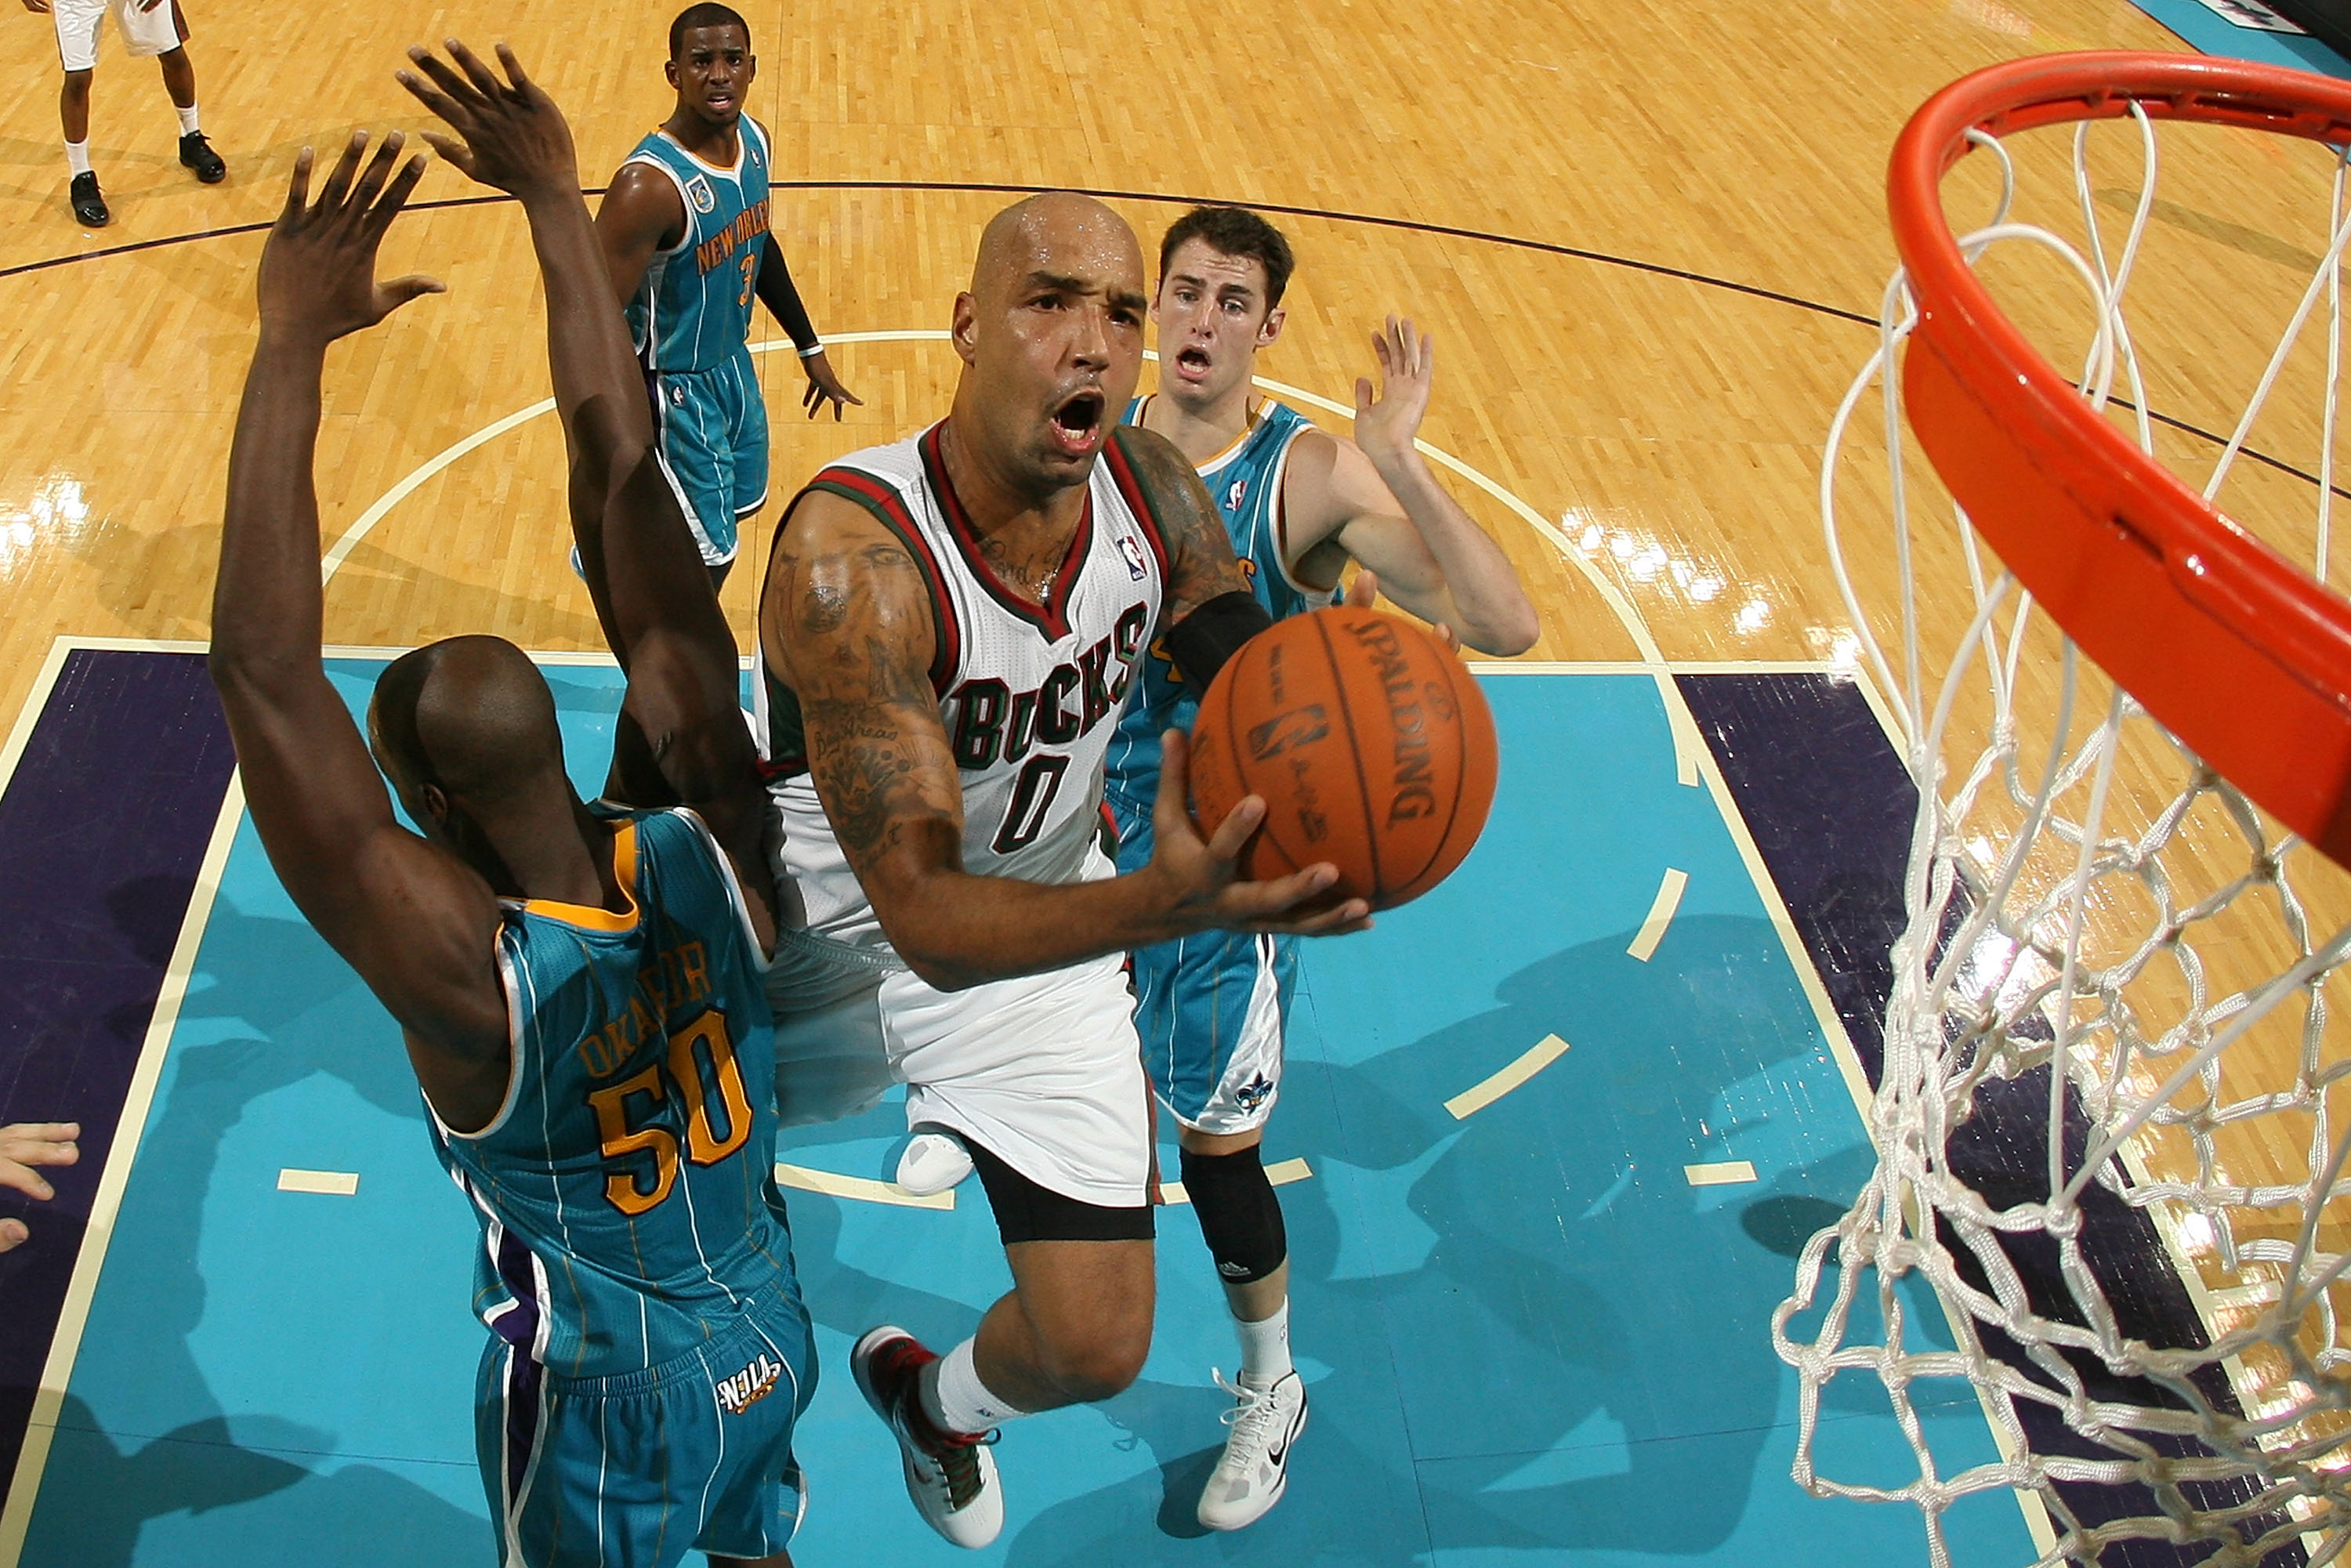 NEW ORLEANS - OCTOBER 27:  Drew Gooden of the Milwaukee Bucks shoots the ball against the New Orleans Hornets on October 27, 2010 in New Orleans, Louisiana.  NOTE TO USER: User expressly acknowledges and agrees that, by downloading and or using this photo